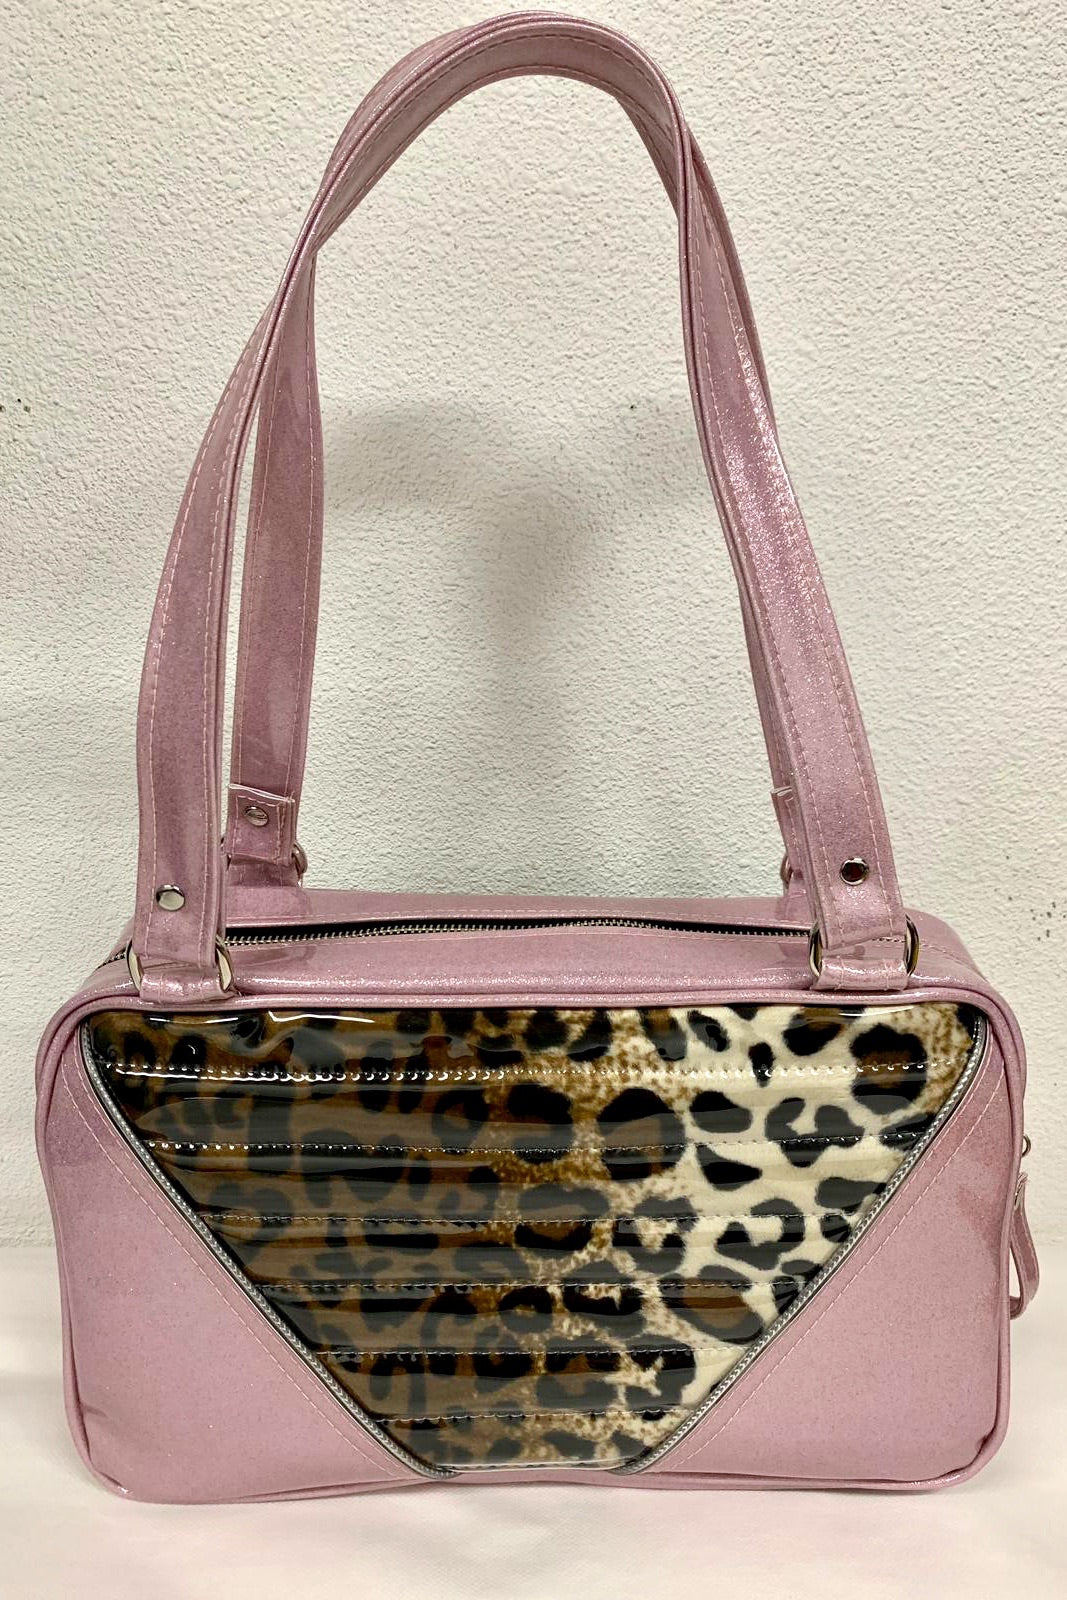 Comet Tote in blush pink glitter vinyl and plush leopard with clear overlay with plush leopard lining handcrafted in California with nickel hardware, an extra set of straps, vinyl zipper pull, inside open divided pocket, zipper pocket with serial number inside and signature Trophy Queen label.